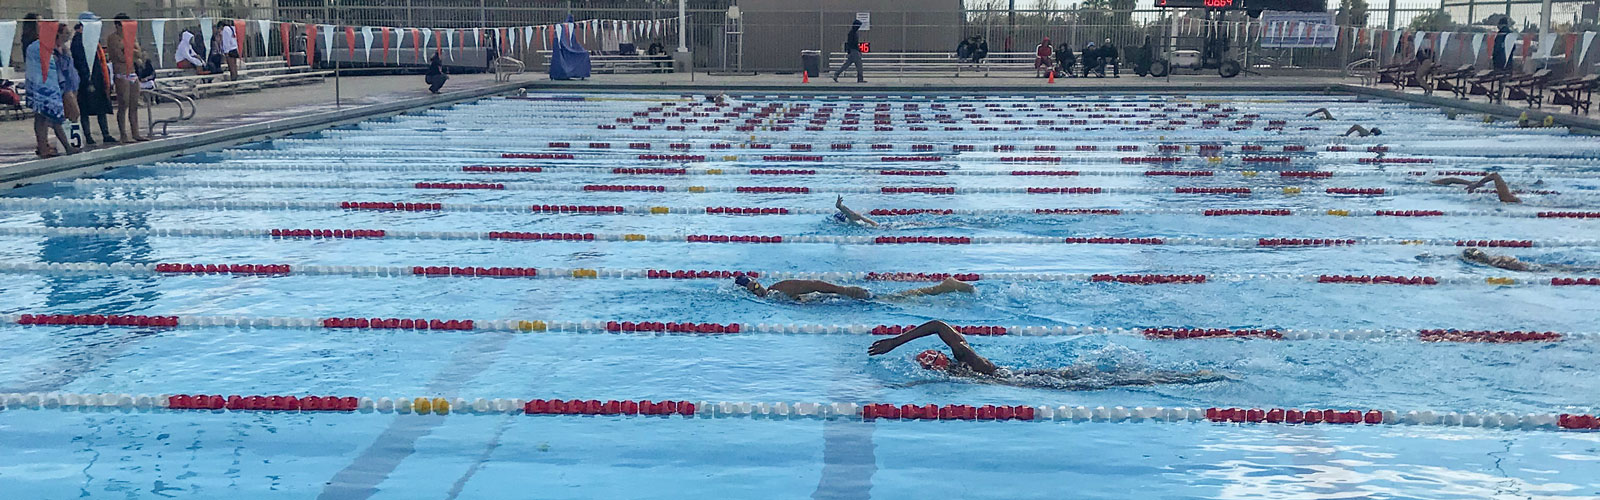 Kristina Copeland competing in the 500 Free Stroke race